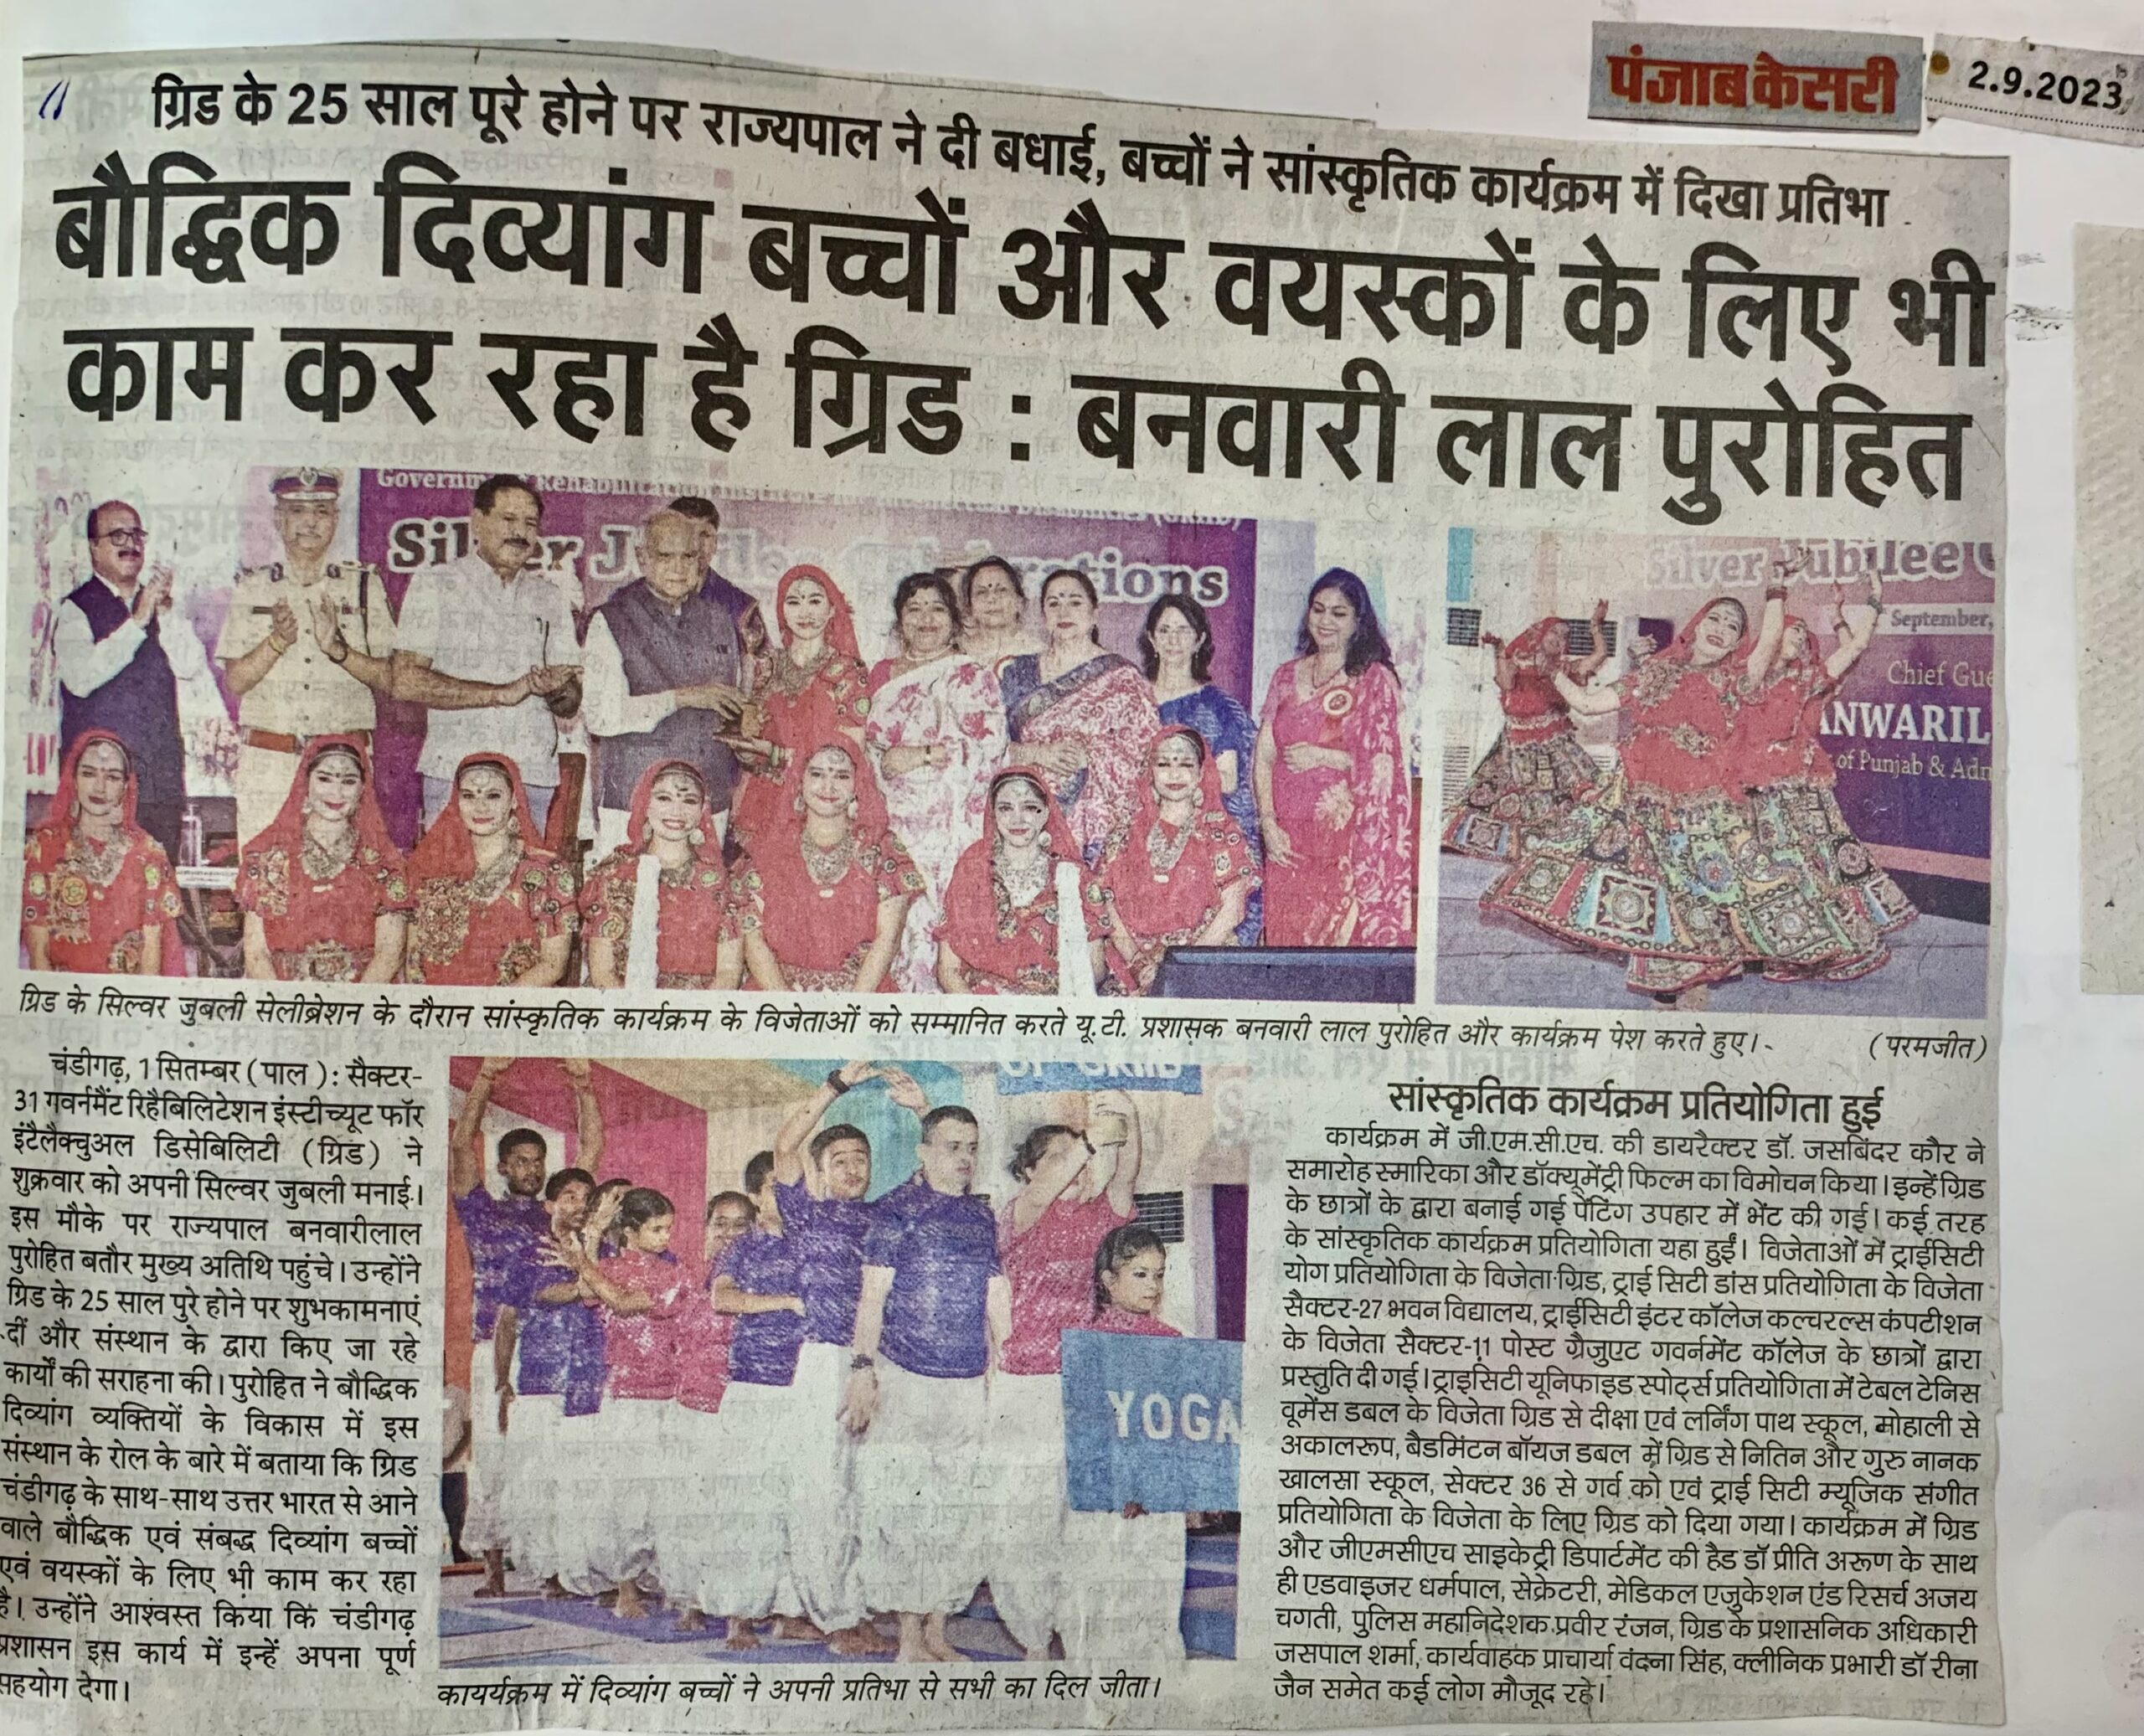 Group Dance team of college honored by Governor of Punjab and Administrator of Chandigarh Sh. Banwarilal Purohit